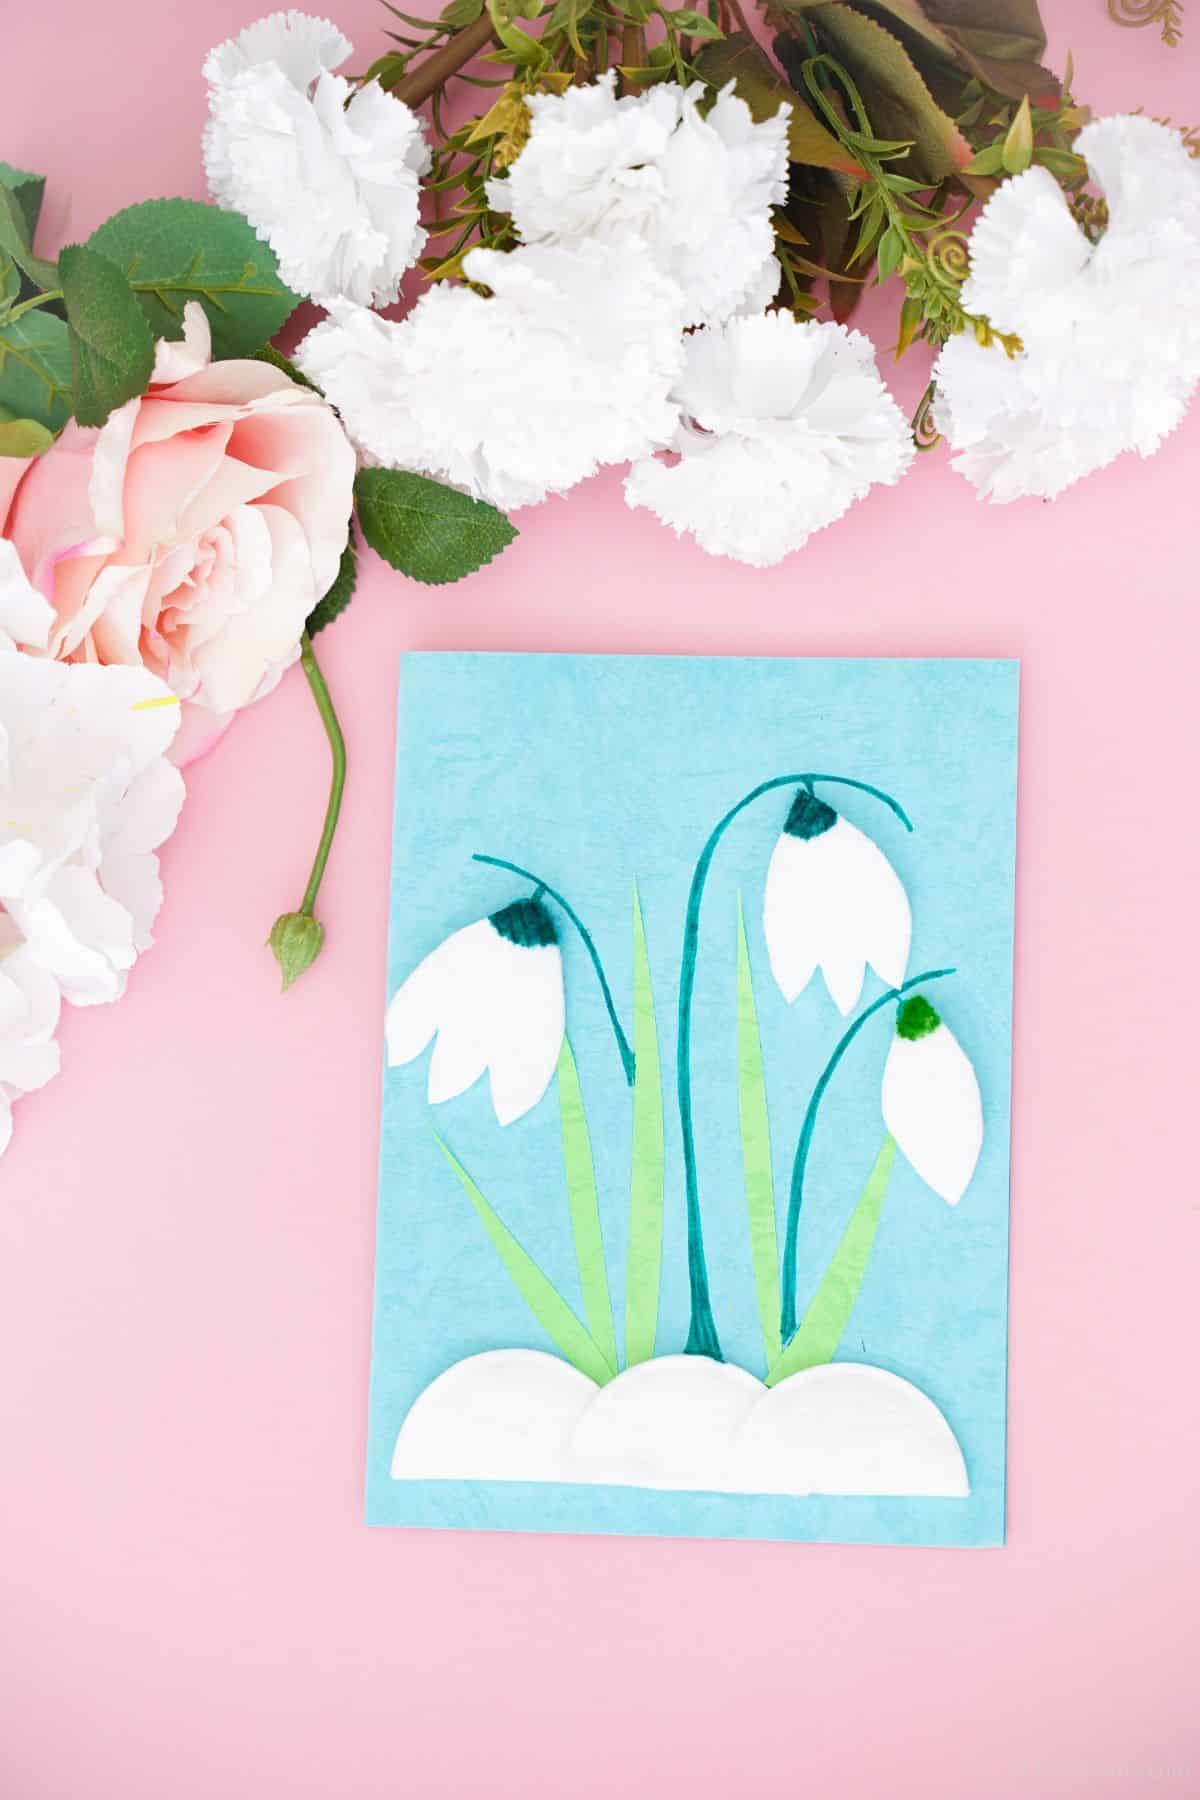 blue and green tulip card laying on pink table